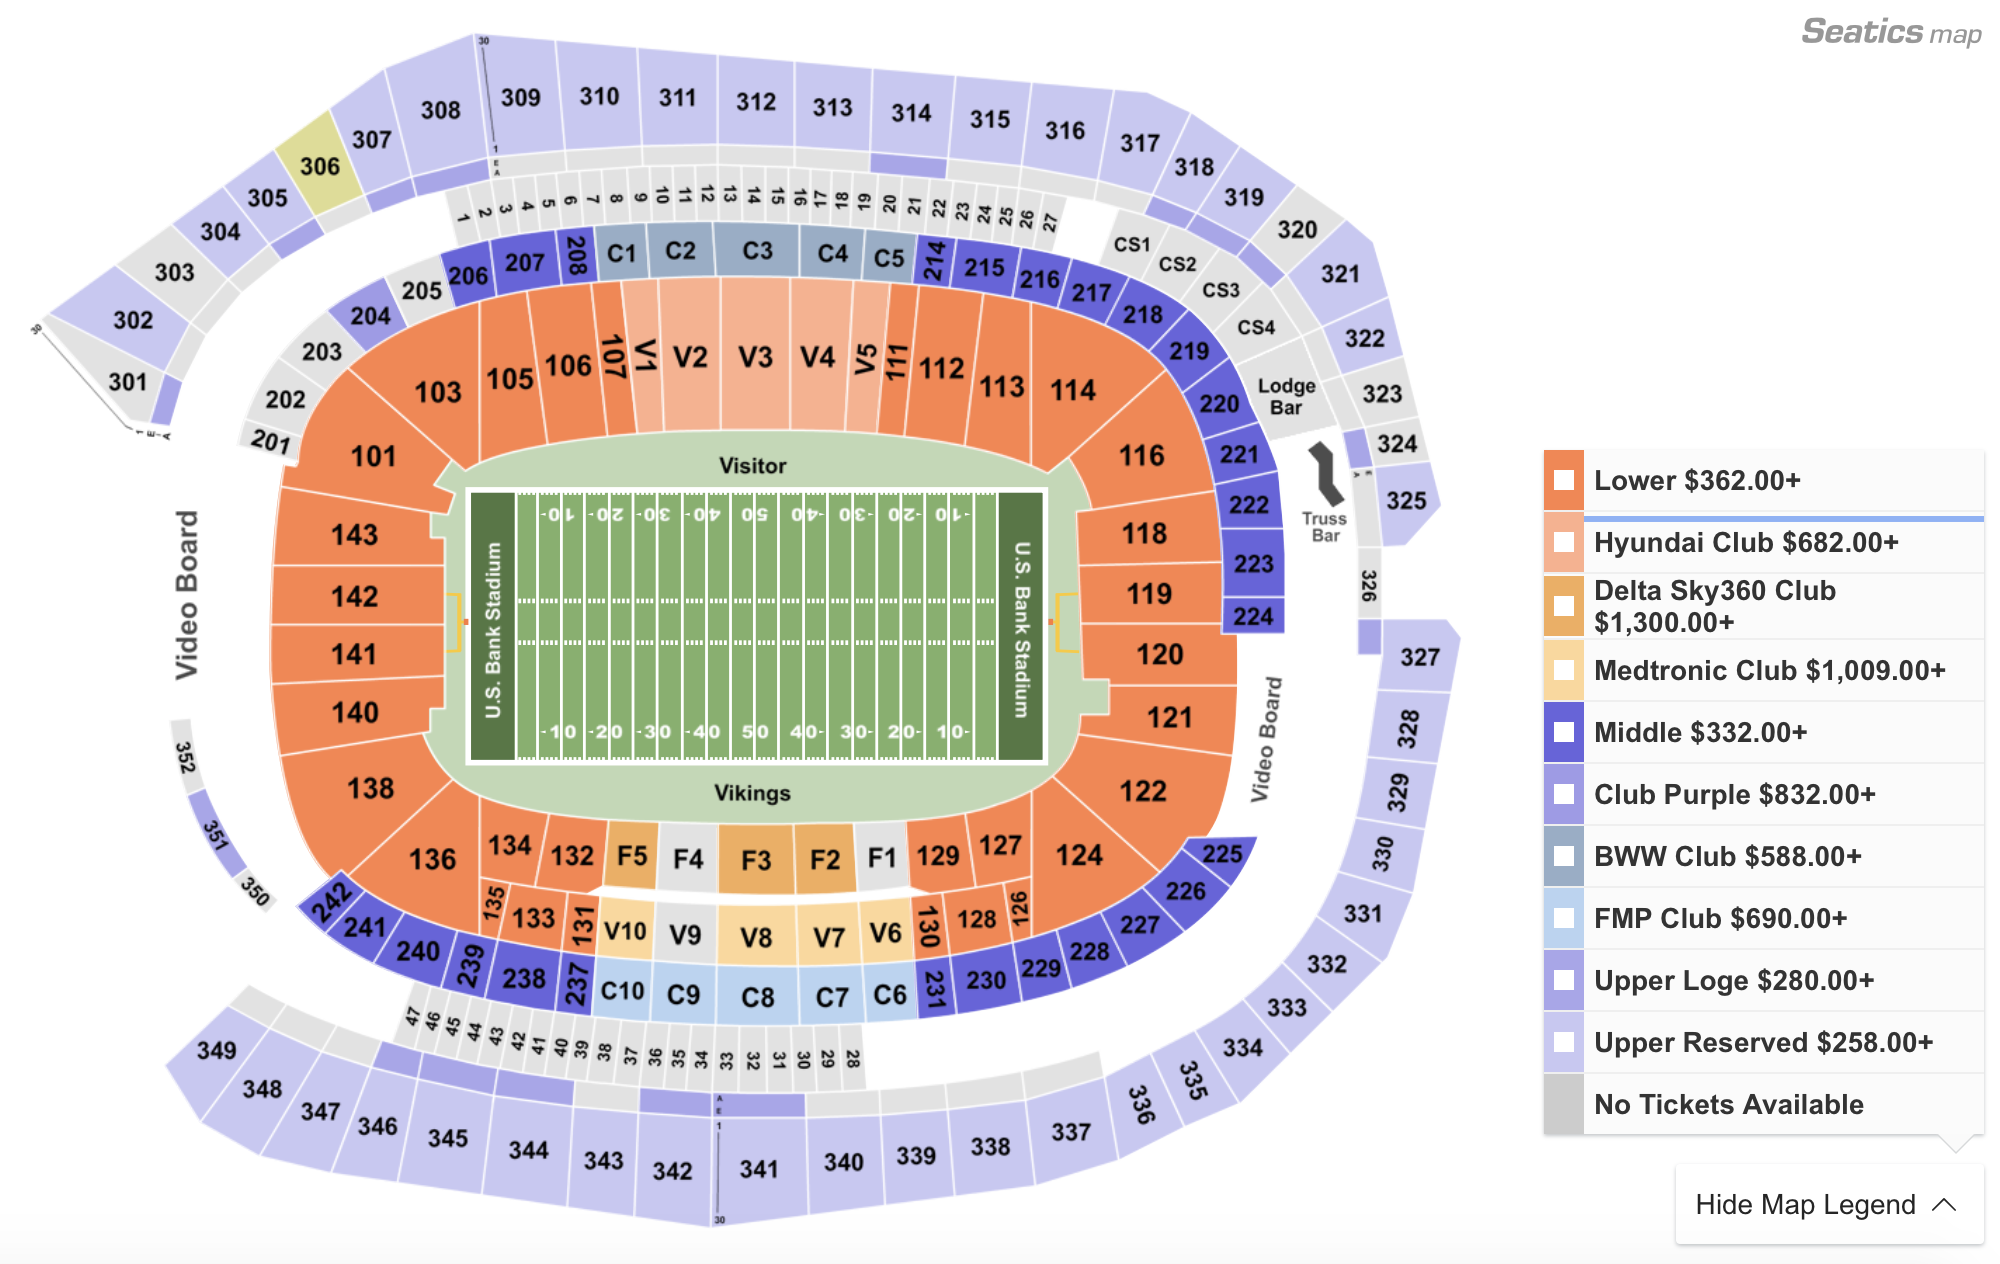 How To Find The Cheapest Vikings Vs. Packers Tickets on 12/23/19